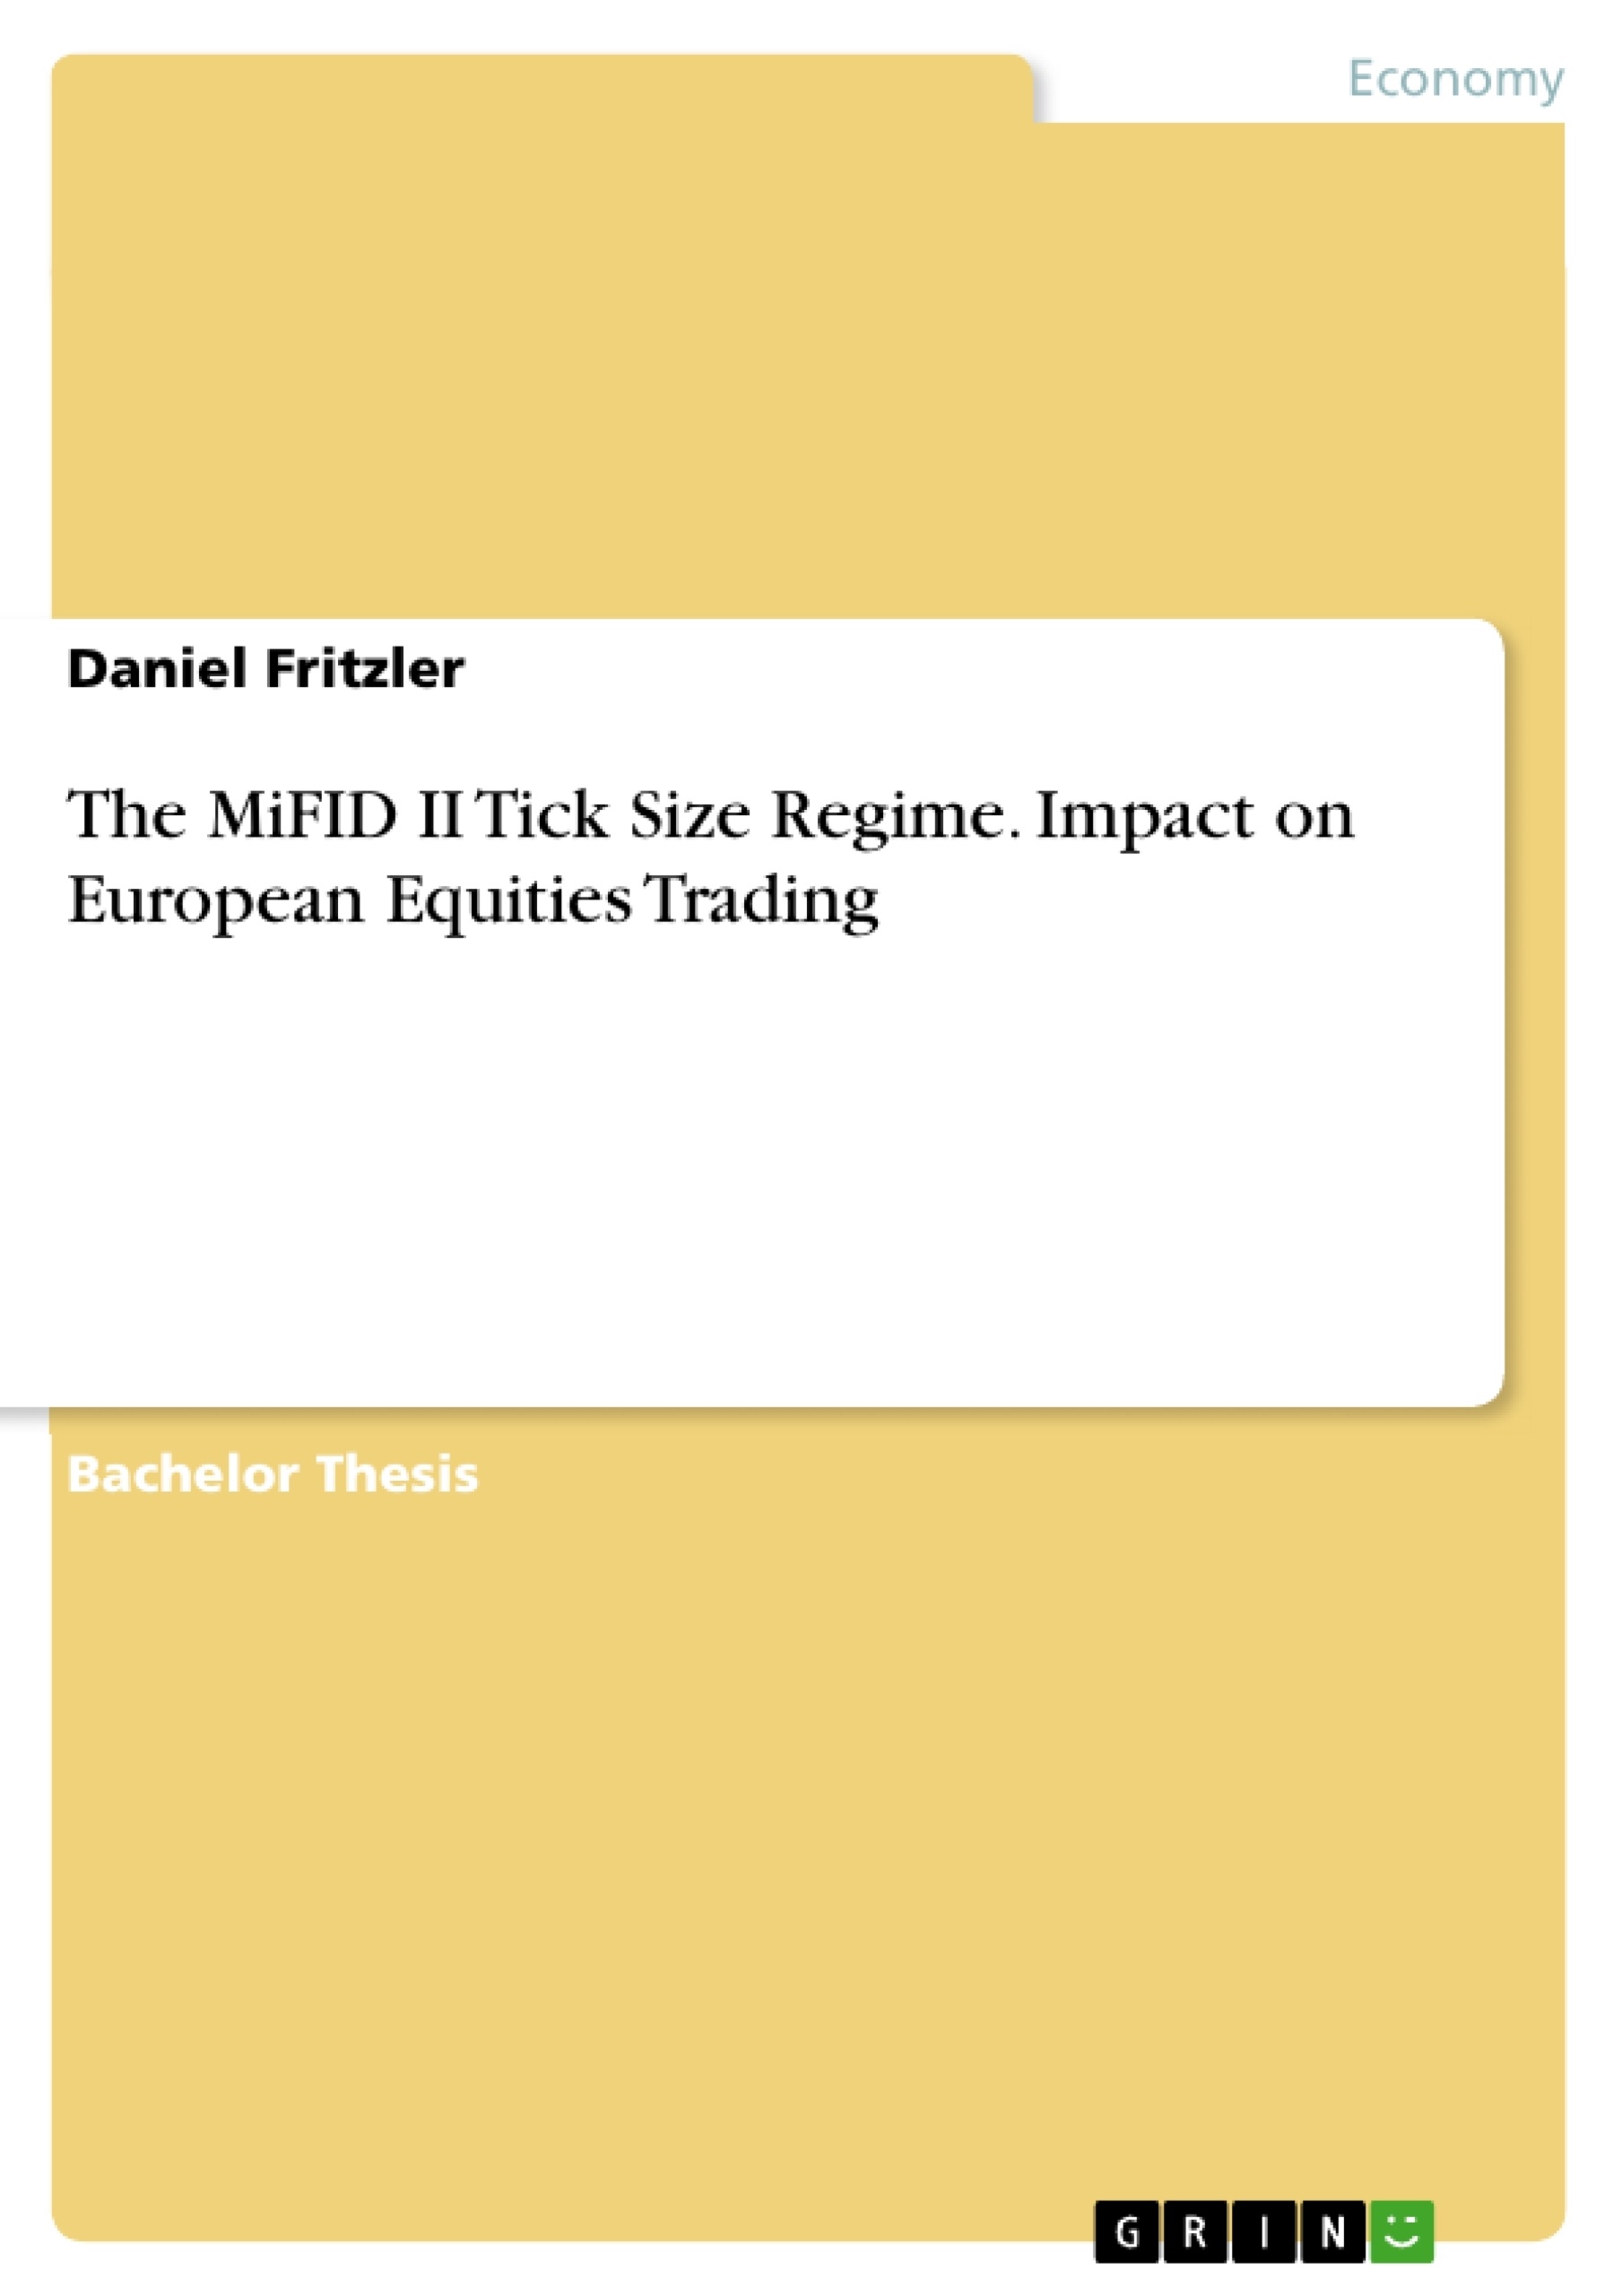 Título: The MiFID II Tick Size Regime. Impact on European Equities Trading